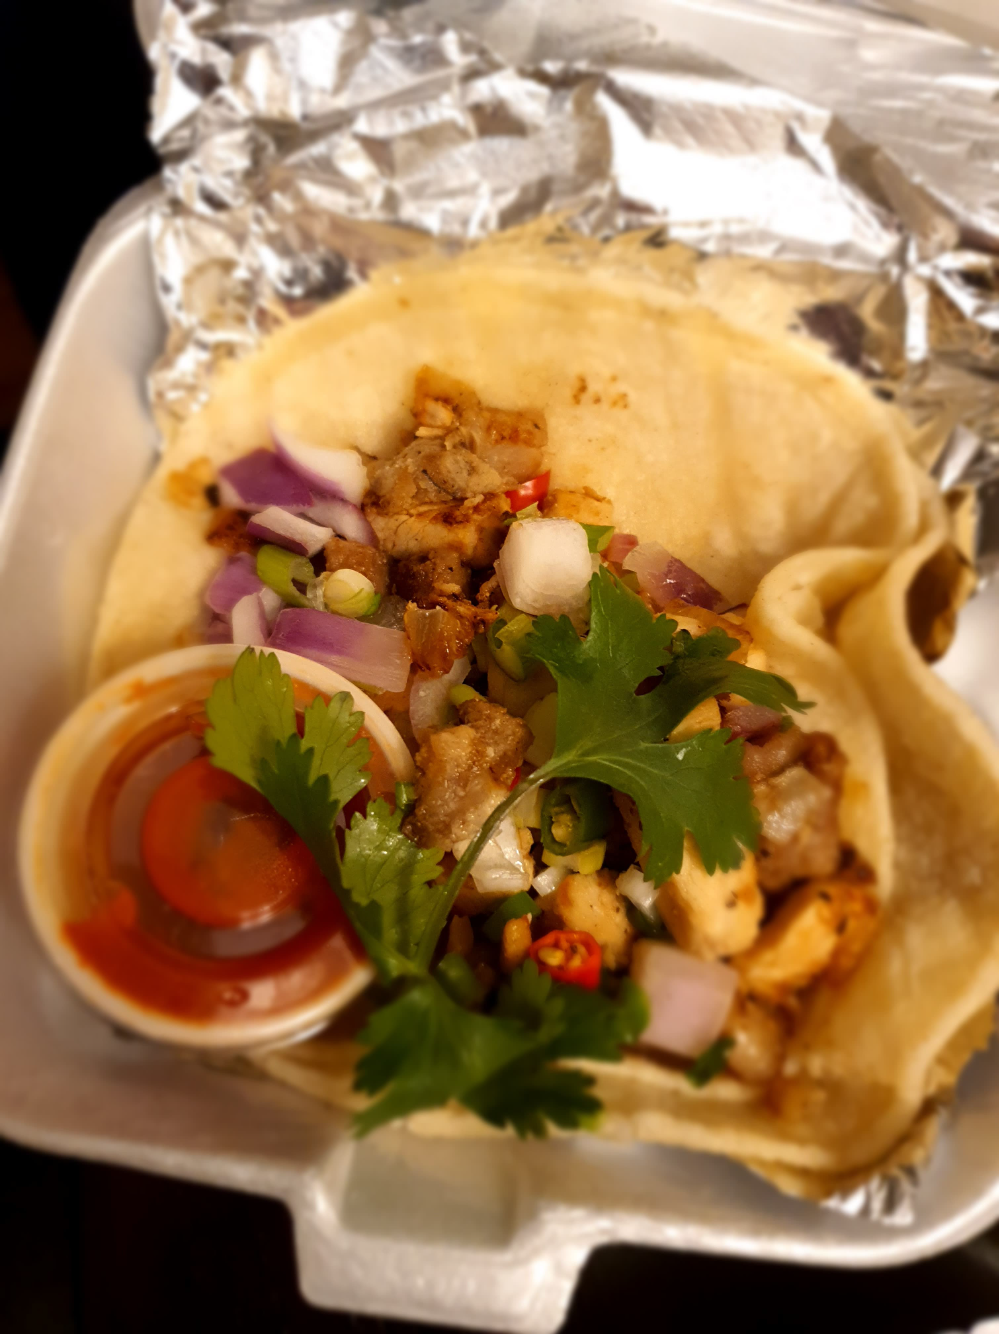 A sisig taco sits on tin foil in a takeout container. Photo by Da Yeon Eom.